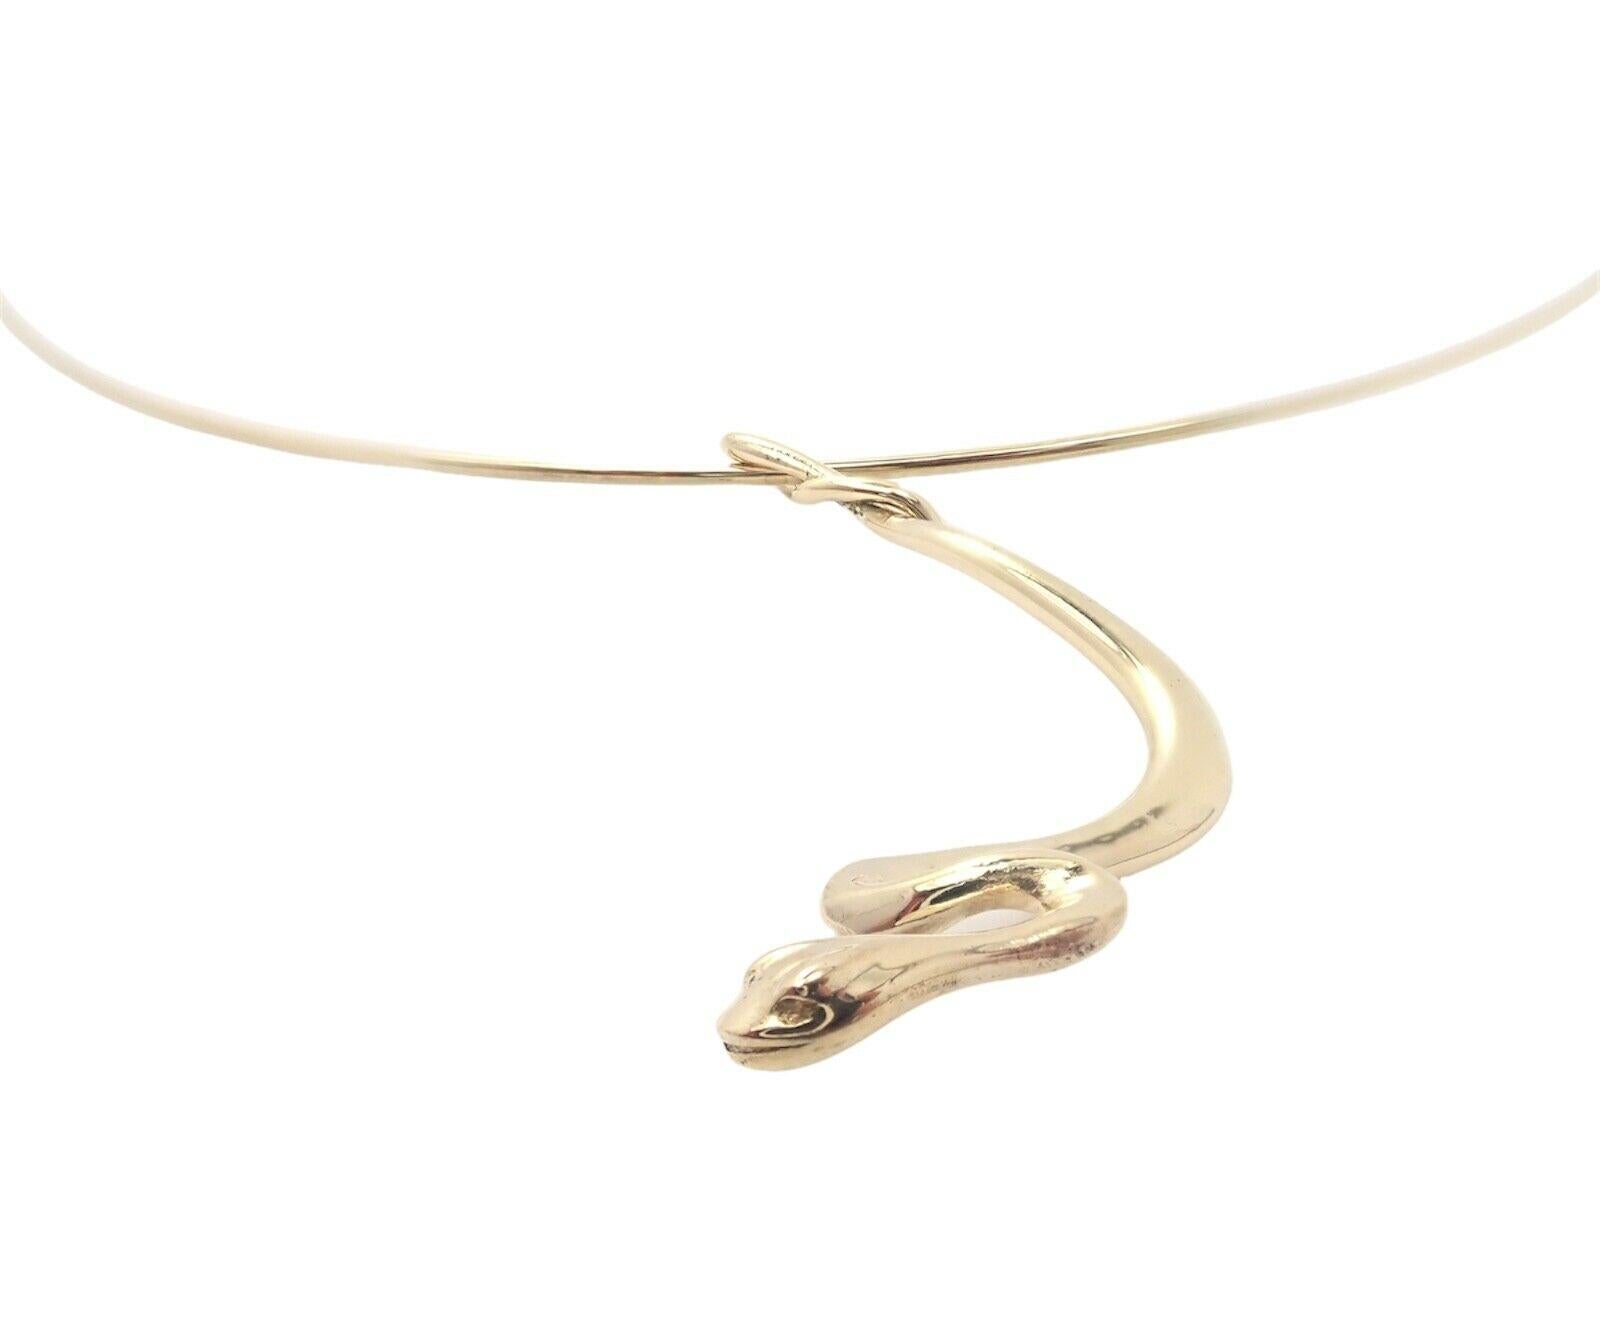 18k Yellow Gold Snake Collar Necklace by Elsa Peretti for Tiffany & Co.
Details:
Length: 15